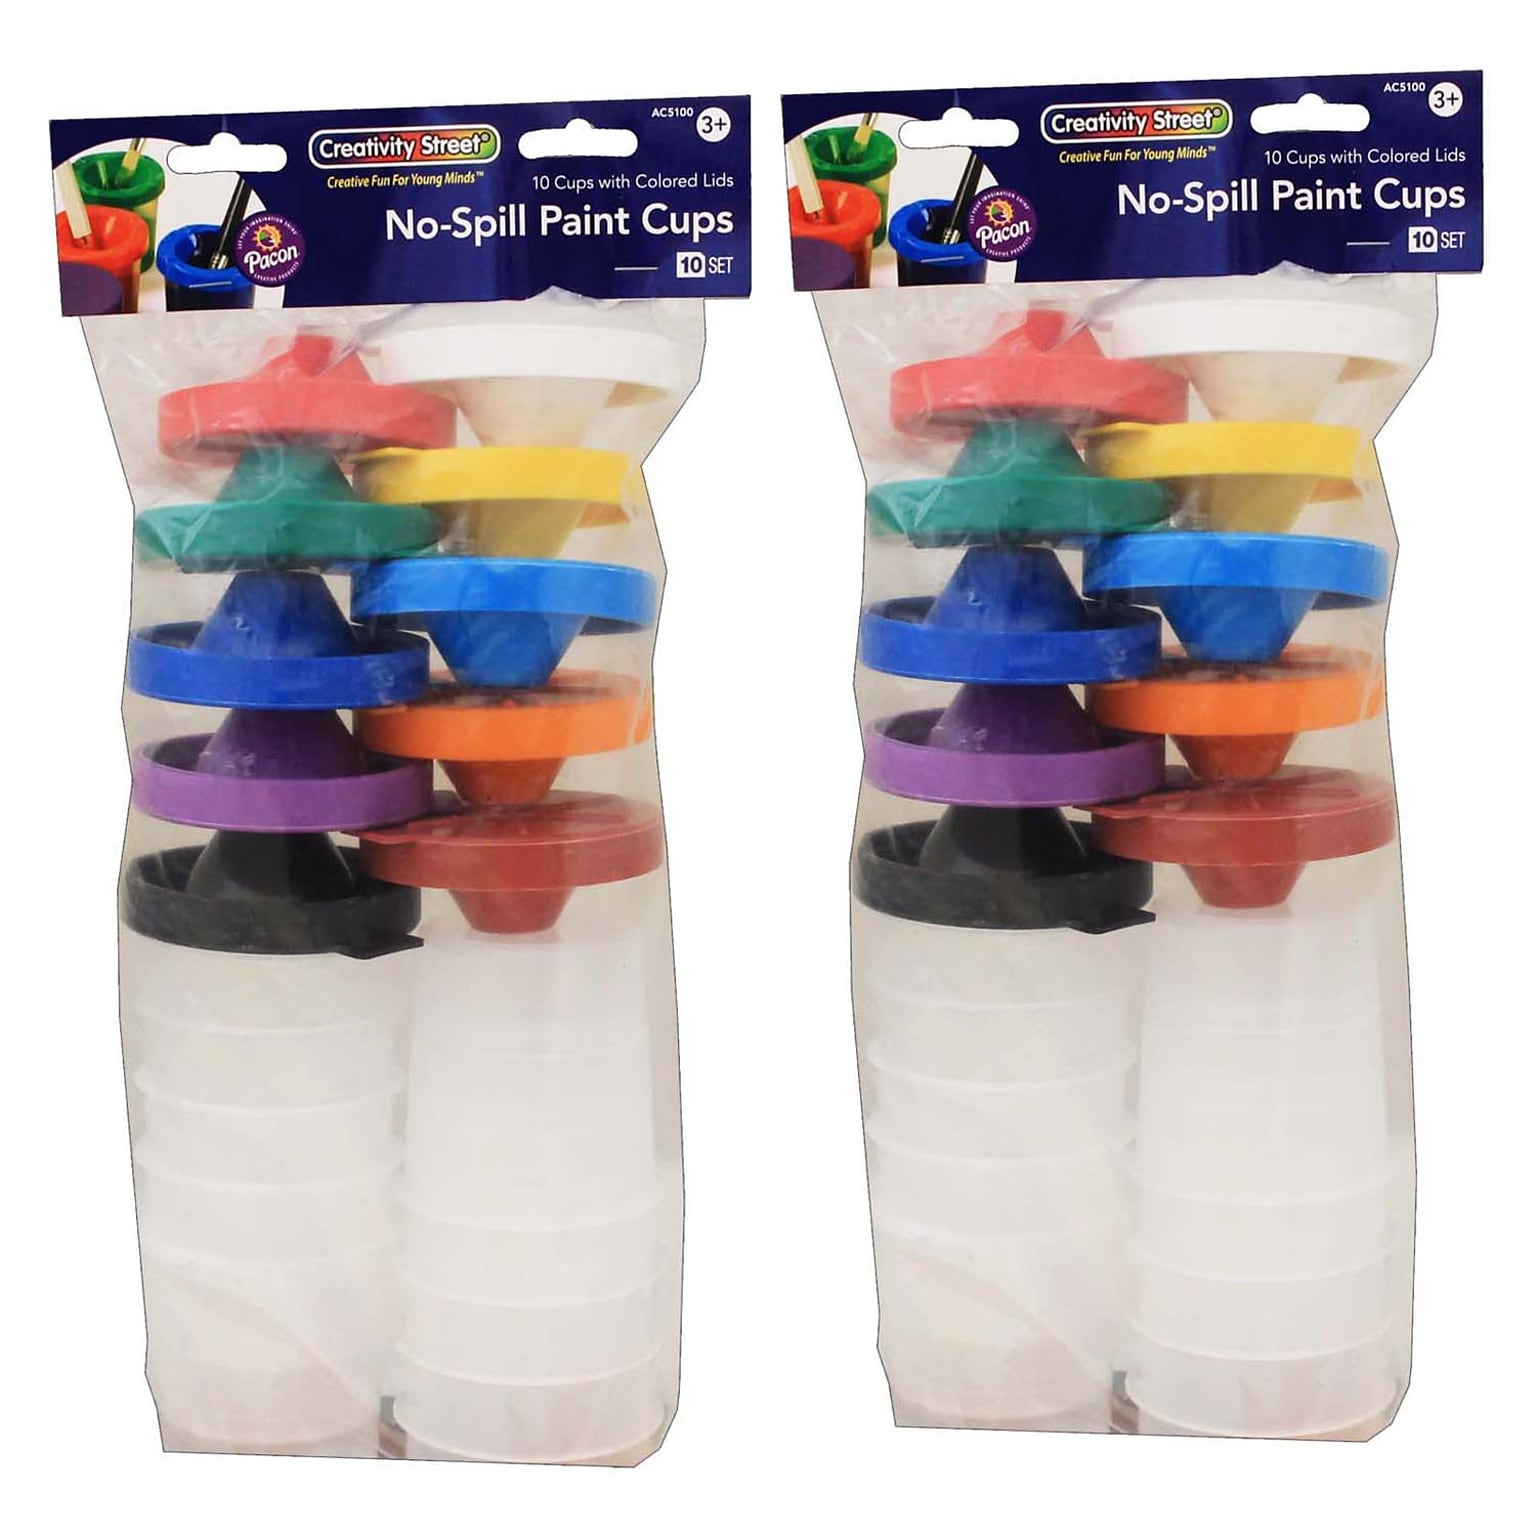 Creativity Street No-Spill Round Paint Cups with Colored Lids, 3 Dia., 10 Per Pack, 2 Packs (CK-5100-2)